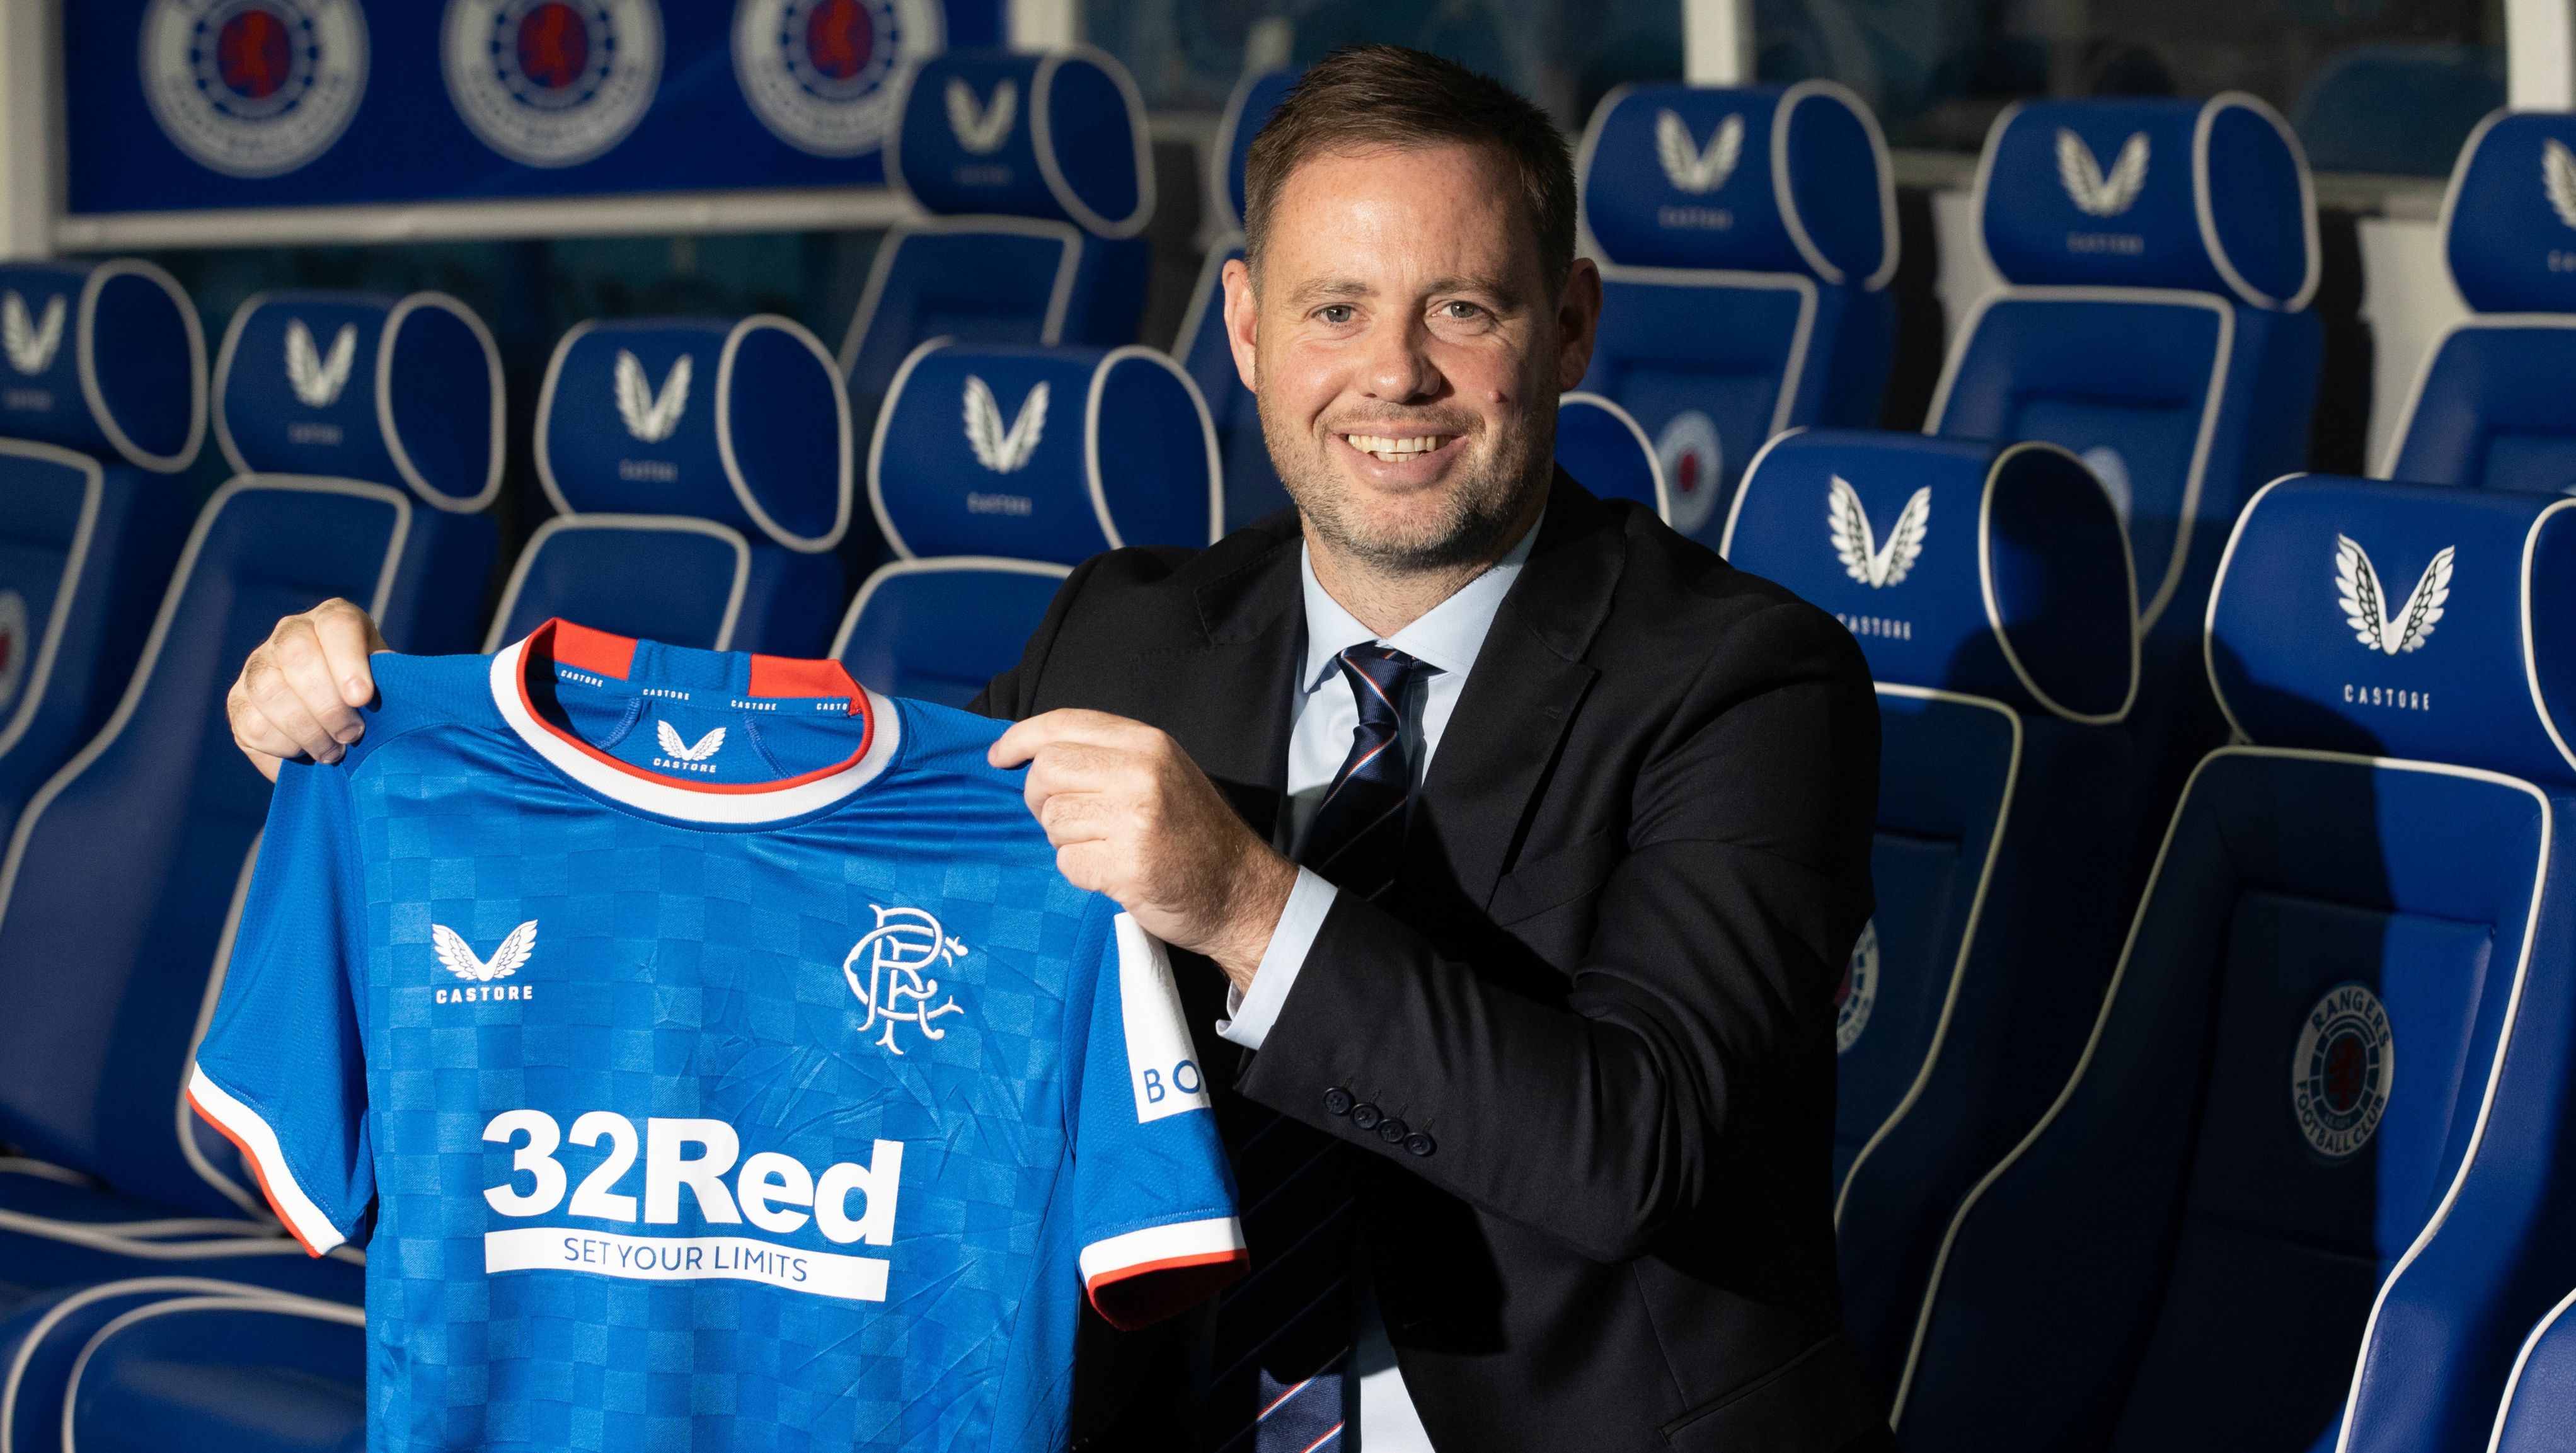 Michael Beale is unveiled as the new Manager of Rangers Football Club at Ibrox Stadium, on December 1, 2022.